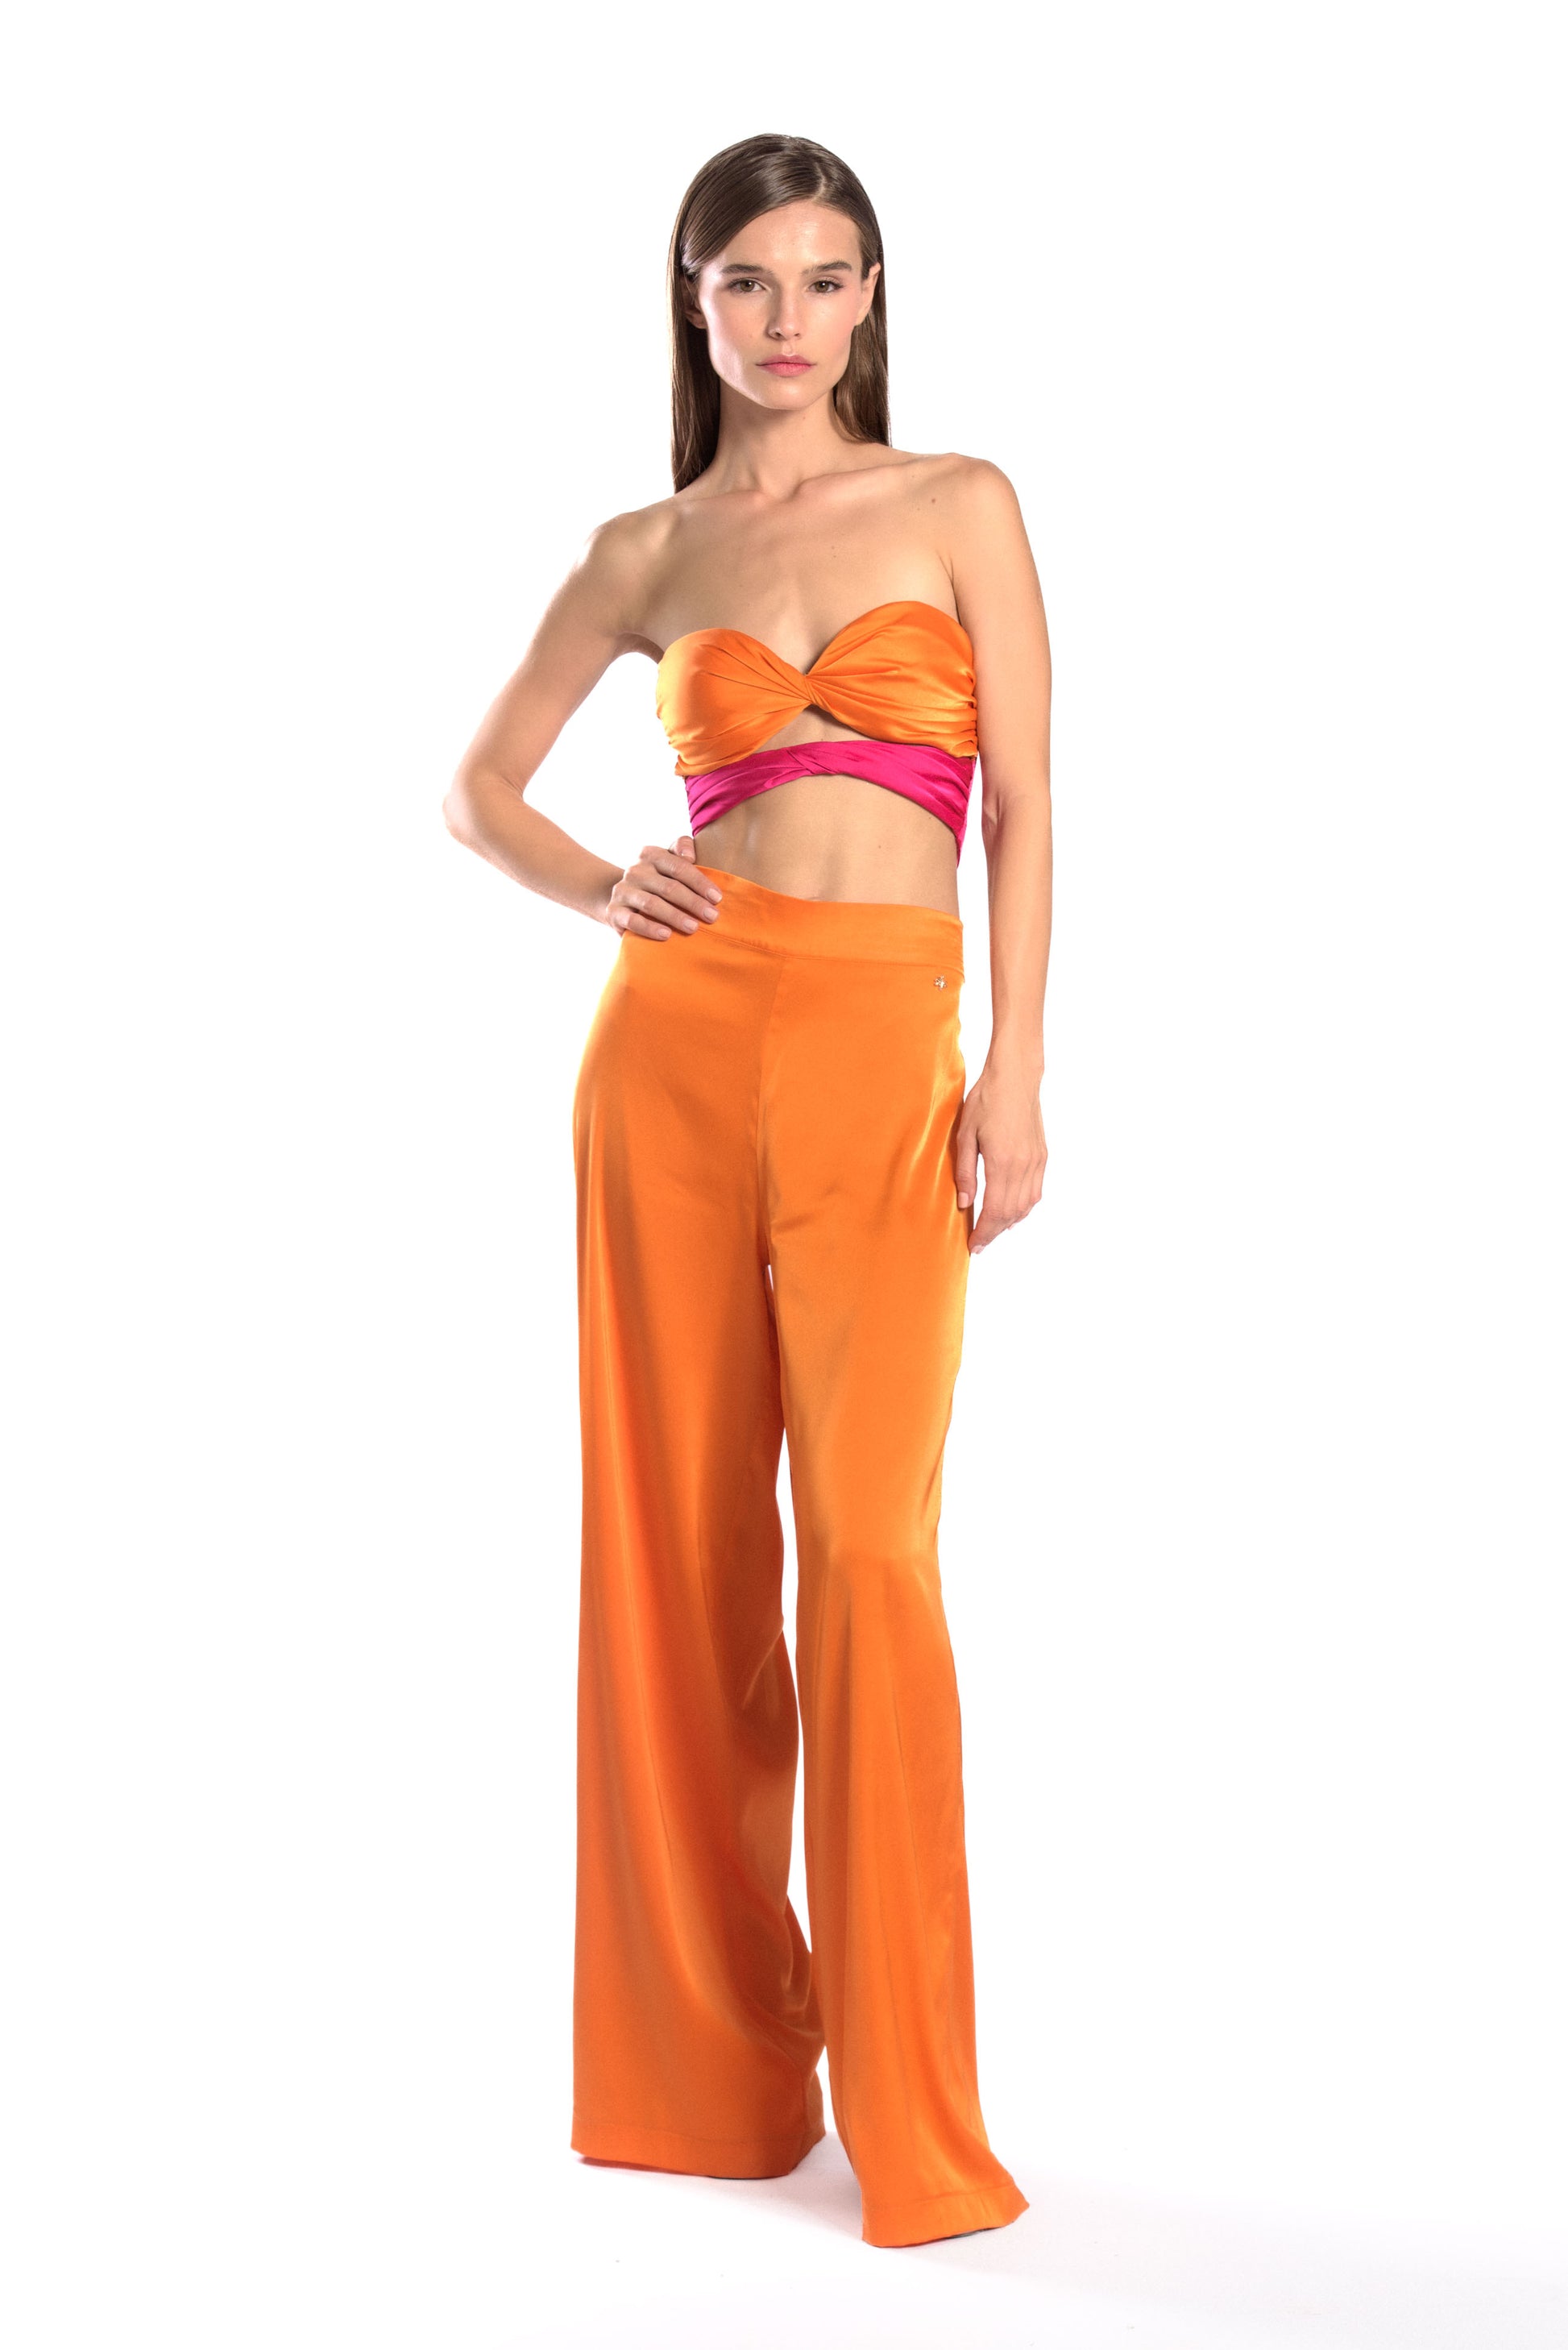 silk pants,firefly charm, side zipper,vibrant silk collection,mix and match,edgy style,luxury fashion,comfort and style,quality design,durable, orange pants